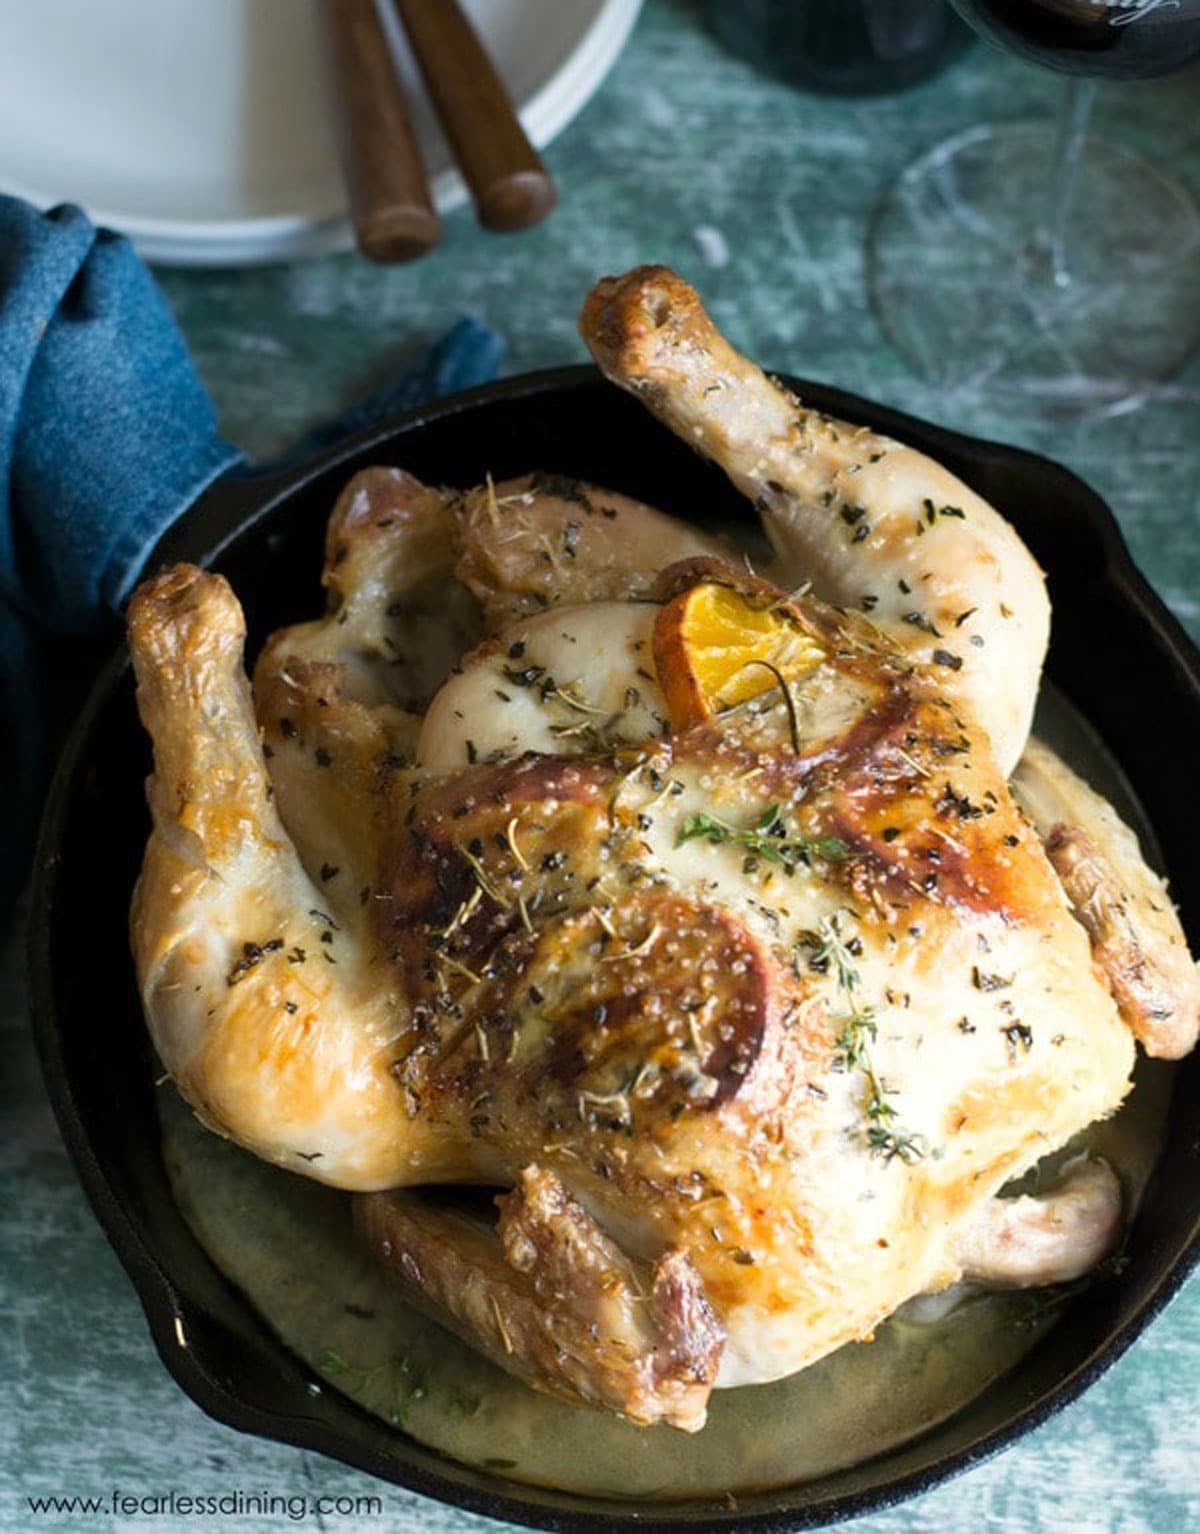 The top view of a roasted whole chicken in a cast iron pan.